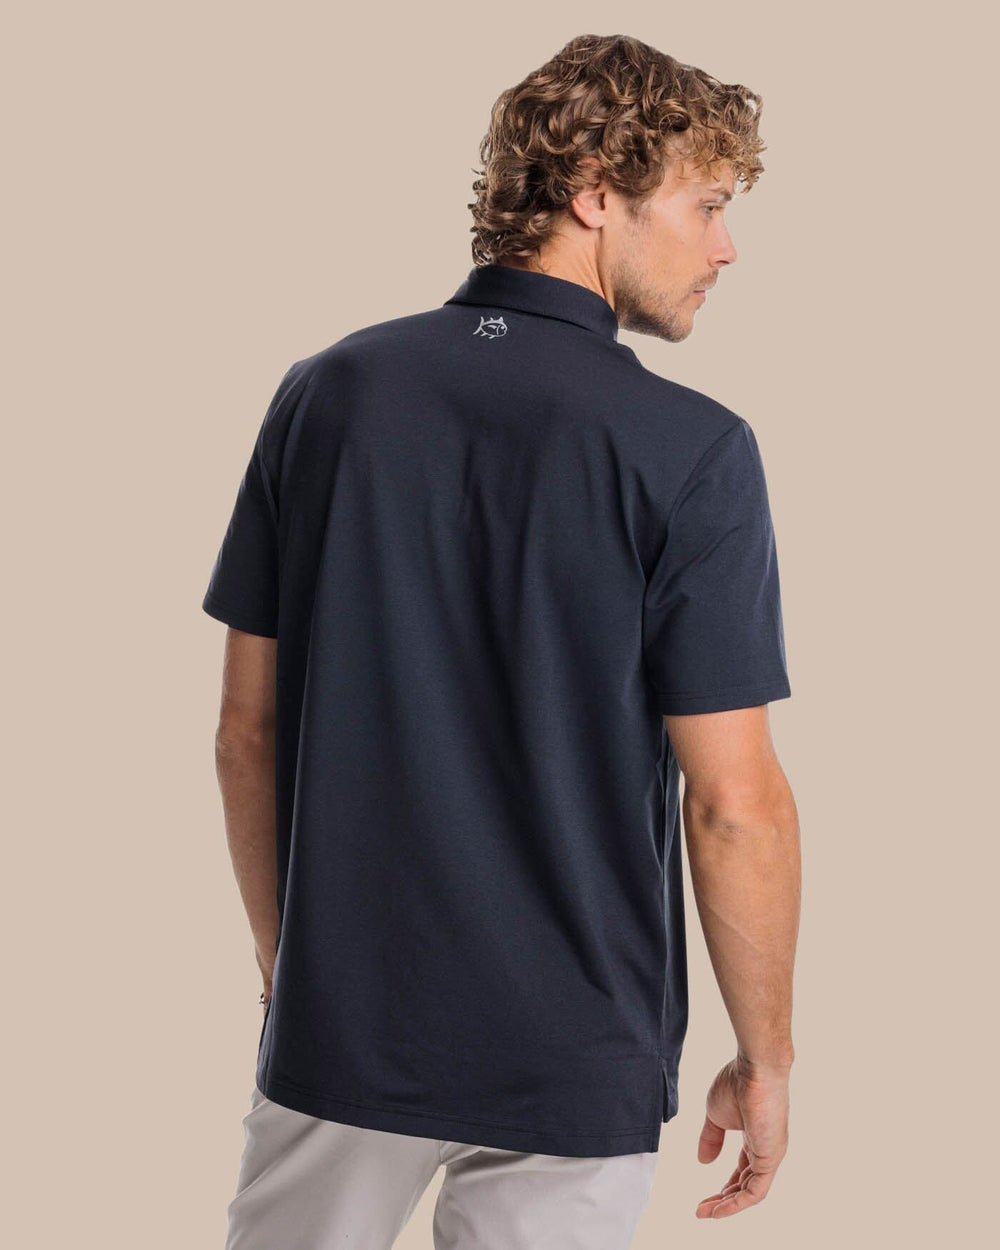 The back view of the Southern Tide brrr-eeze Heather Performance Polo Shirt by Southern Tide - Heather Caviar Black